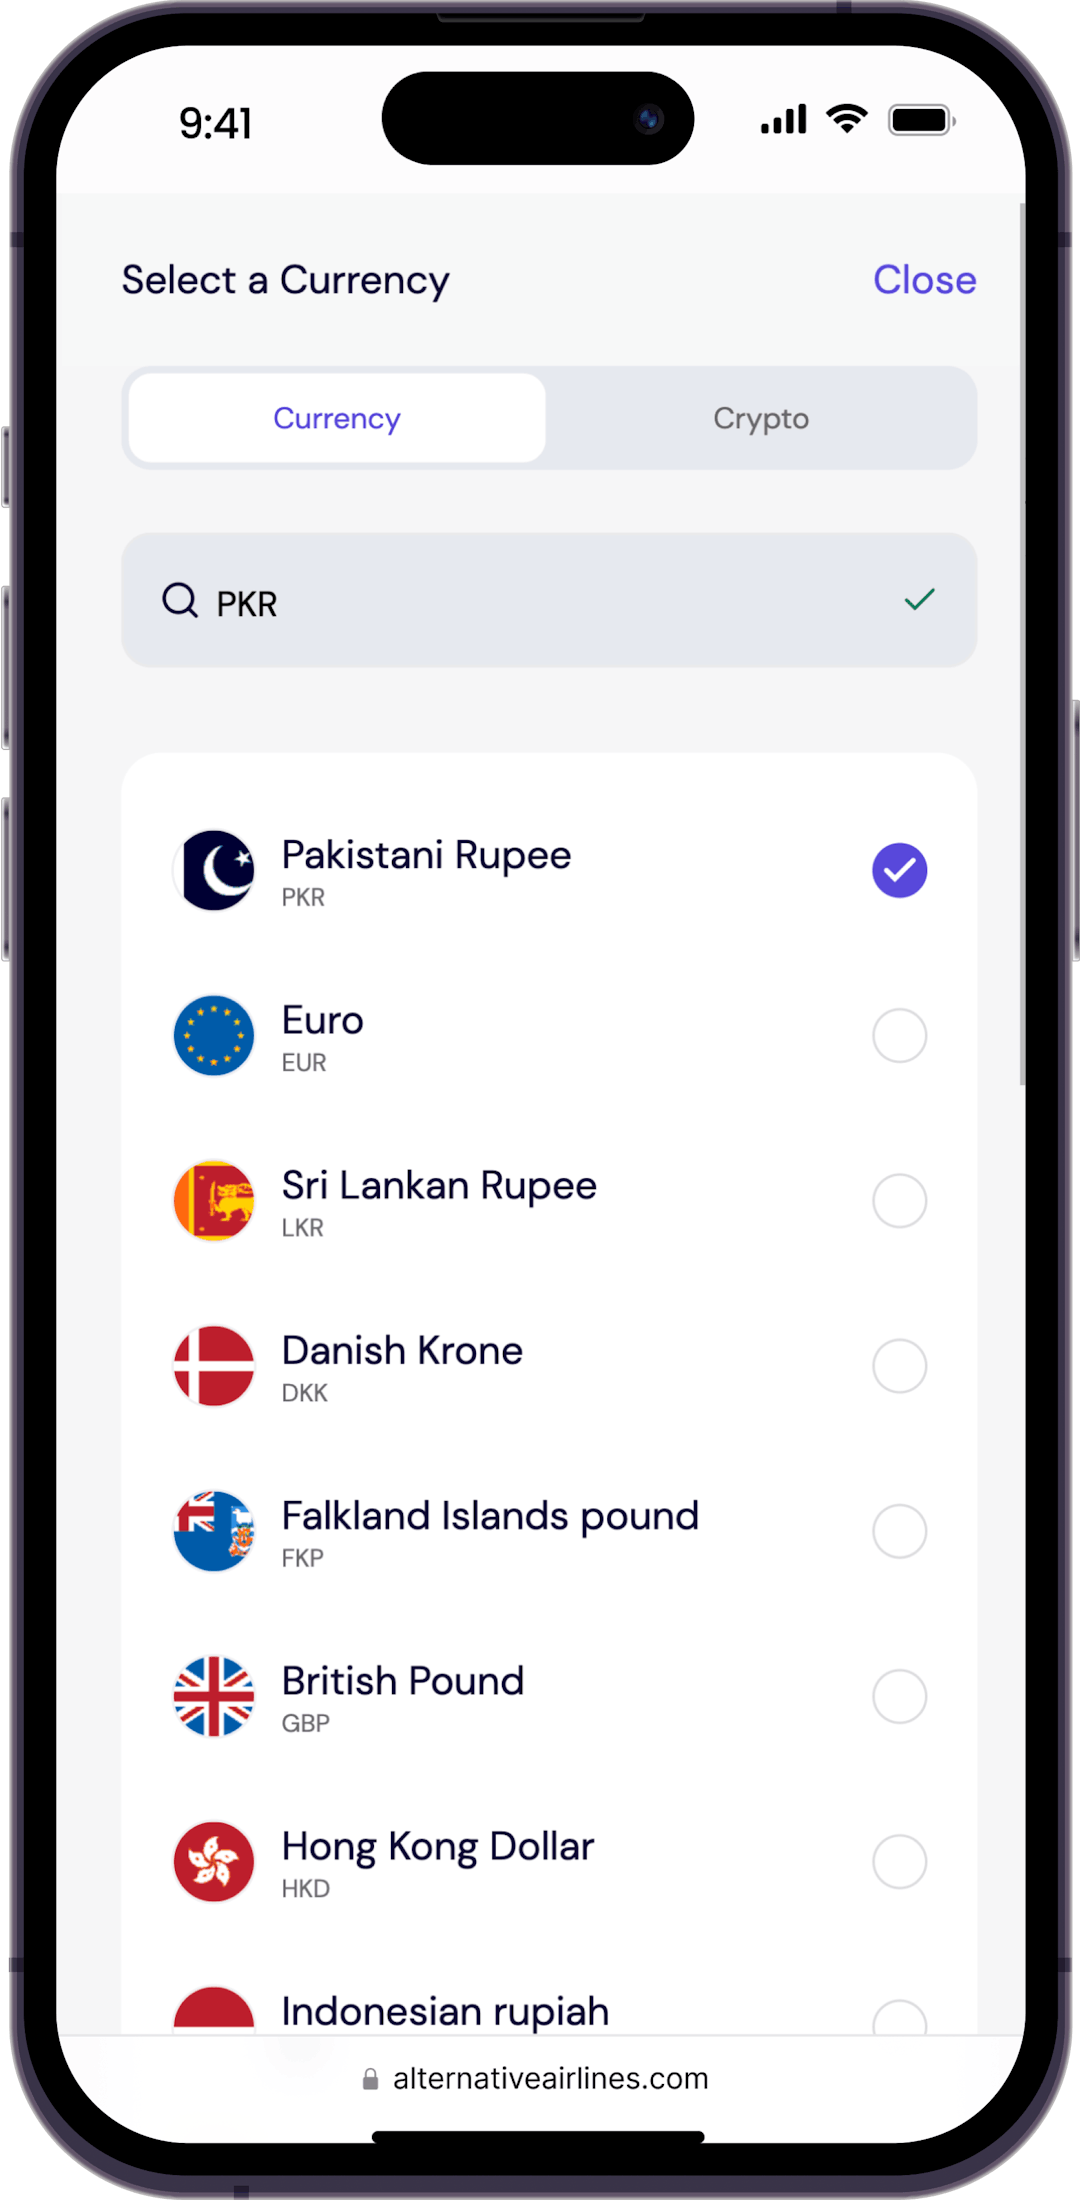 Step 3 - type 'PKR' to search for flights in Pakistani Rupee